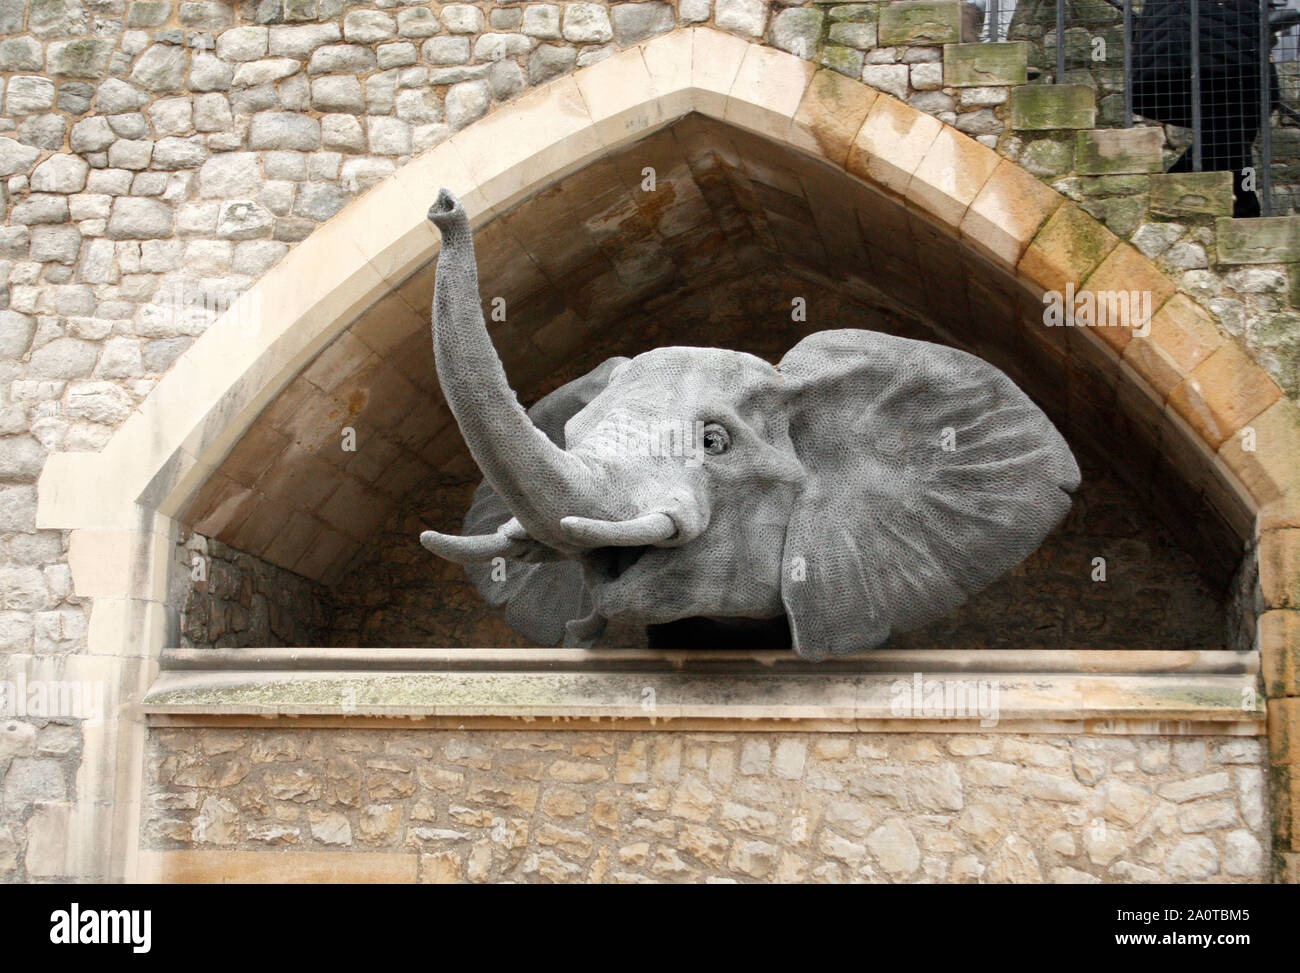 Elephant sculpture at the Tower of London Stock Photo